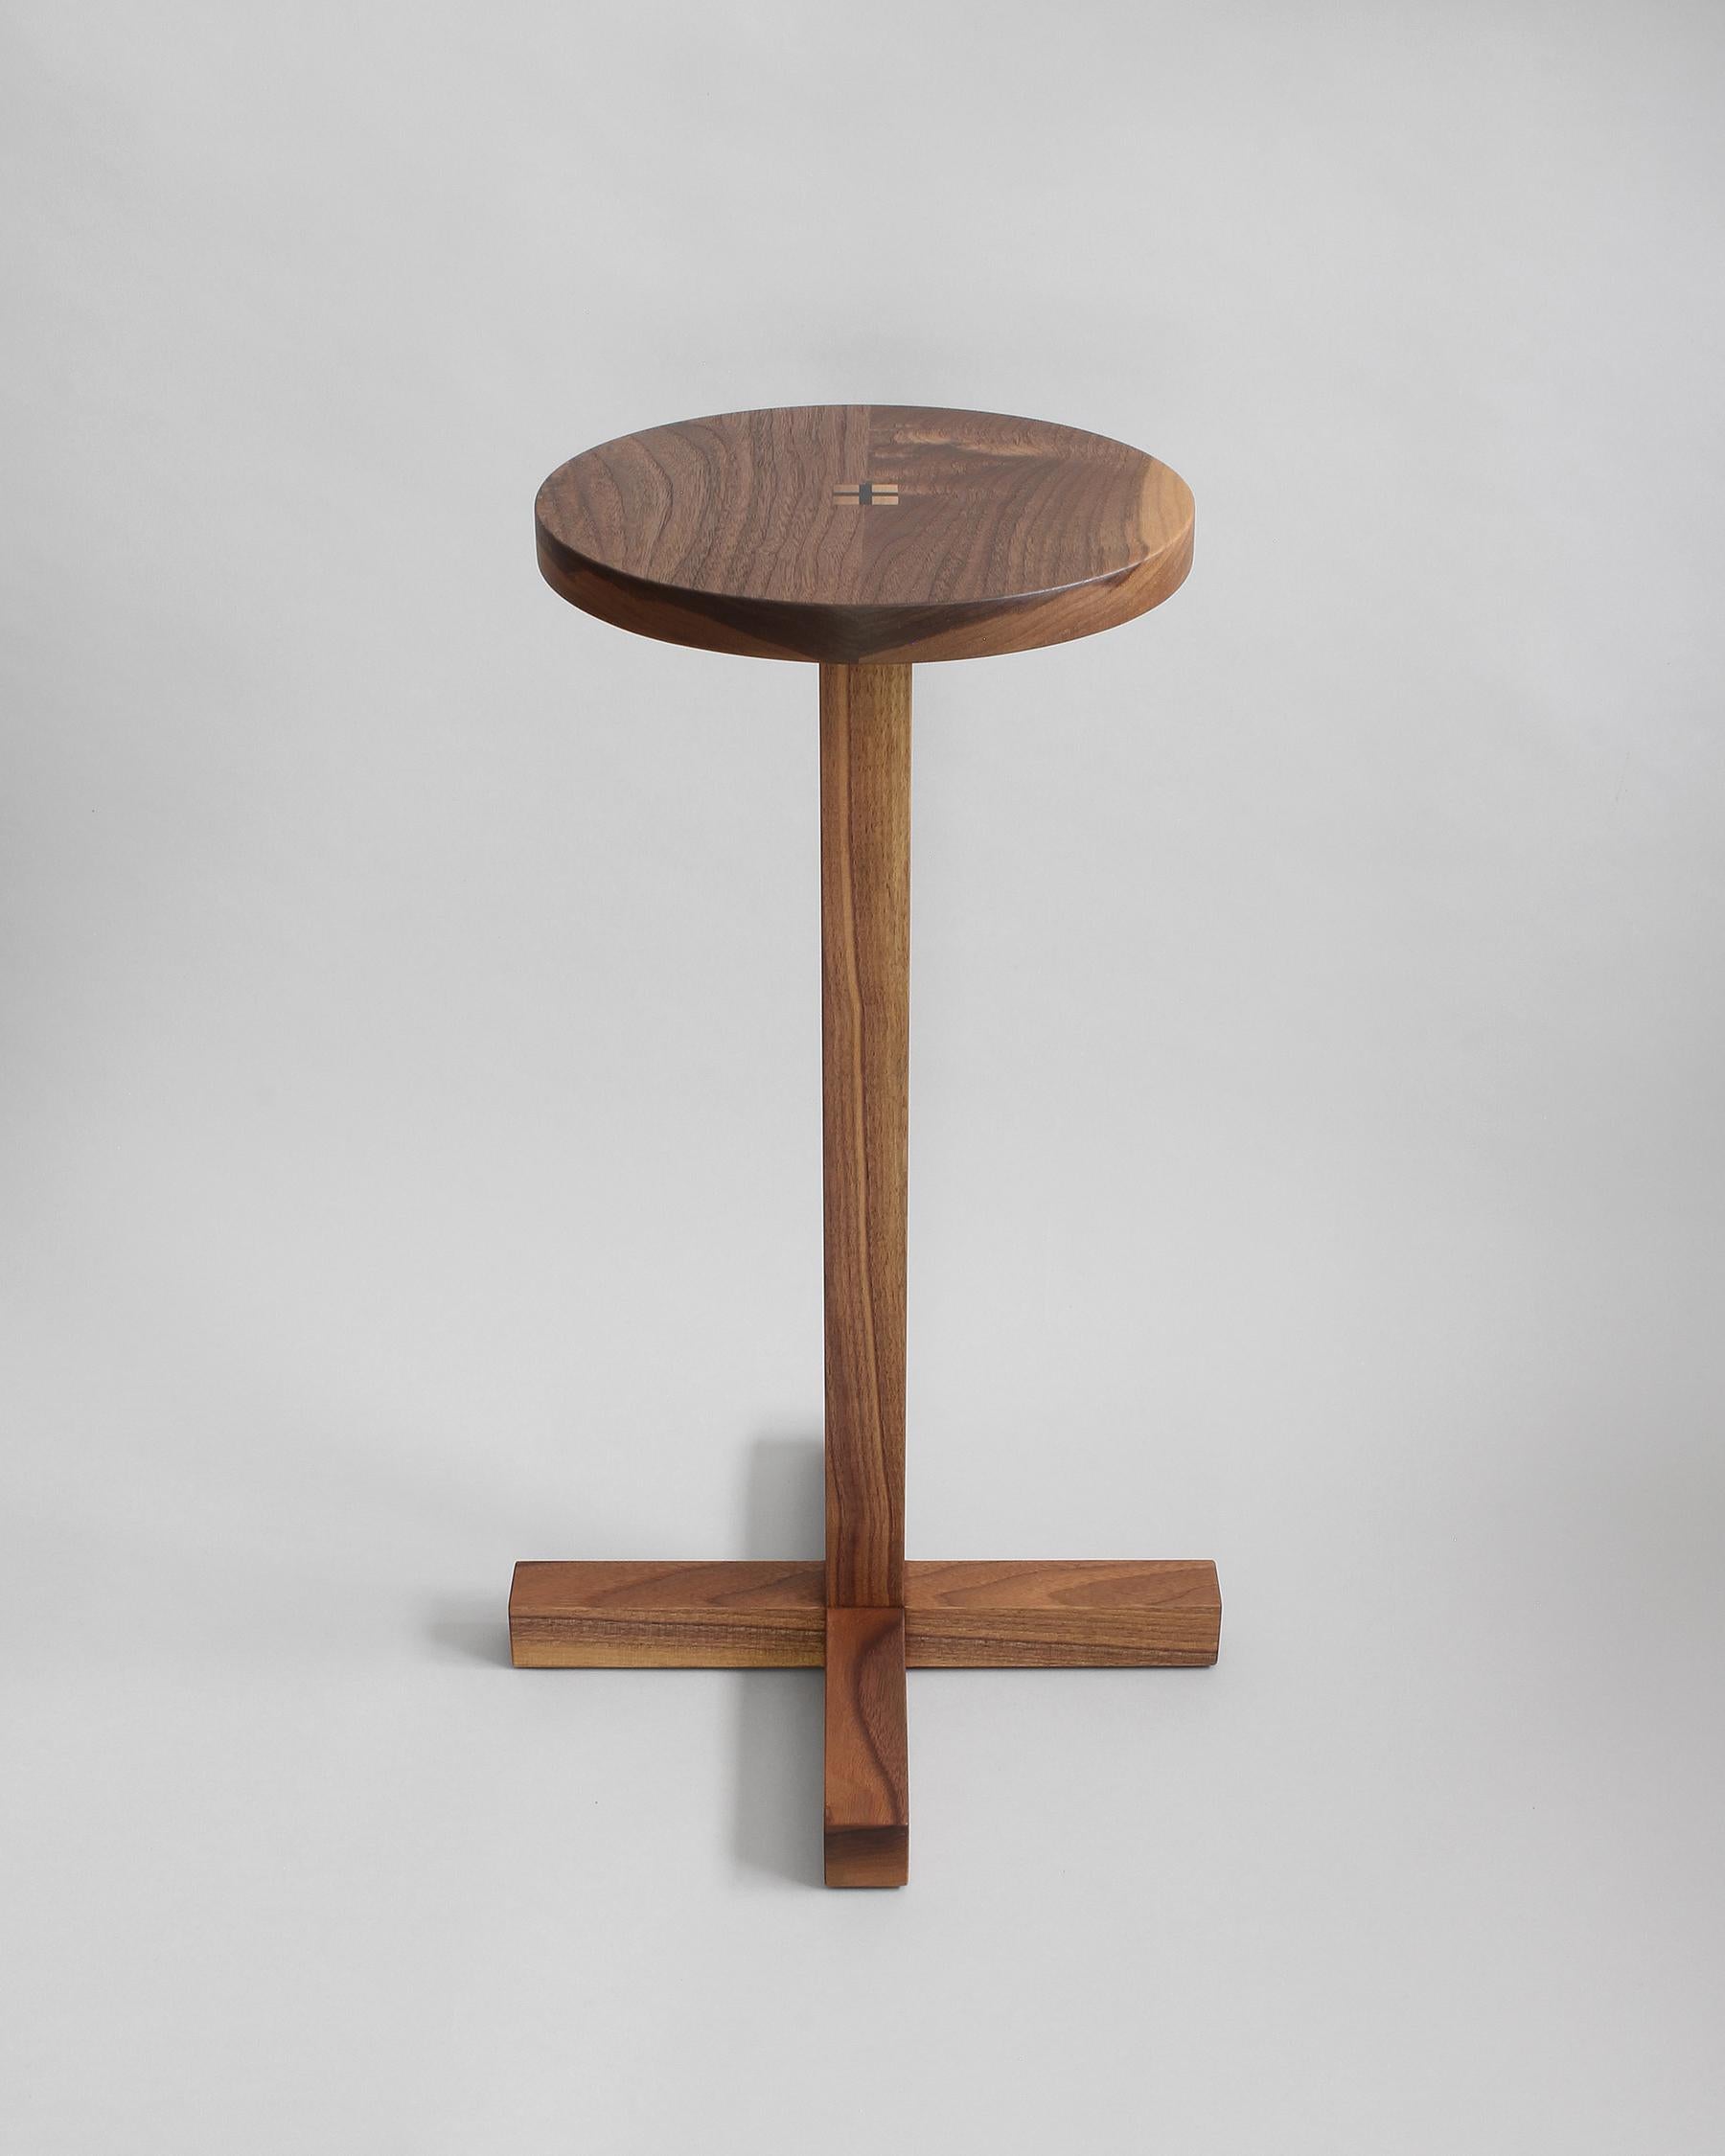 Drink Table with solid California Black Walnut top joined to a solid walnut base.  The table pictured is ready to ship. Ebony wedges at center table top are driven permanently into place to combine  top with base. The base is constructed with